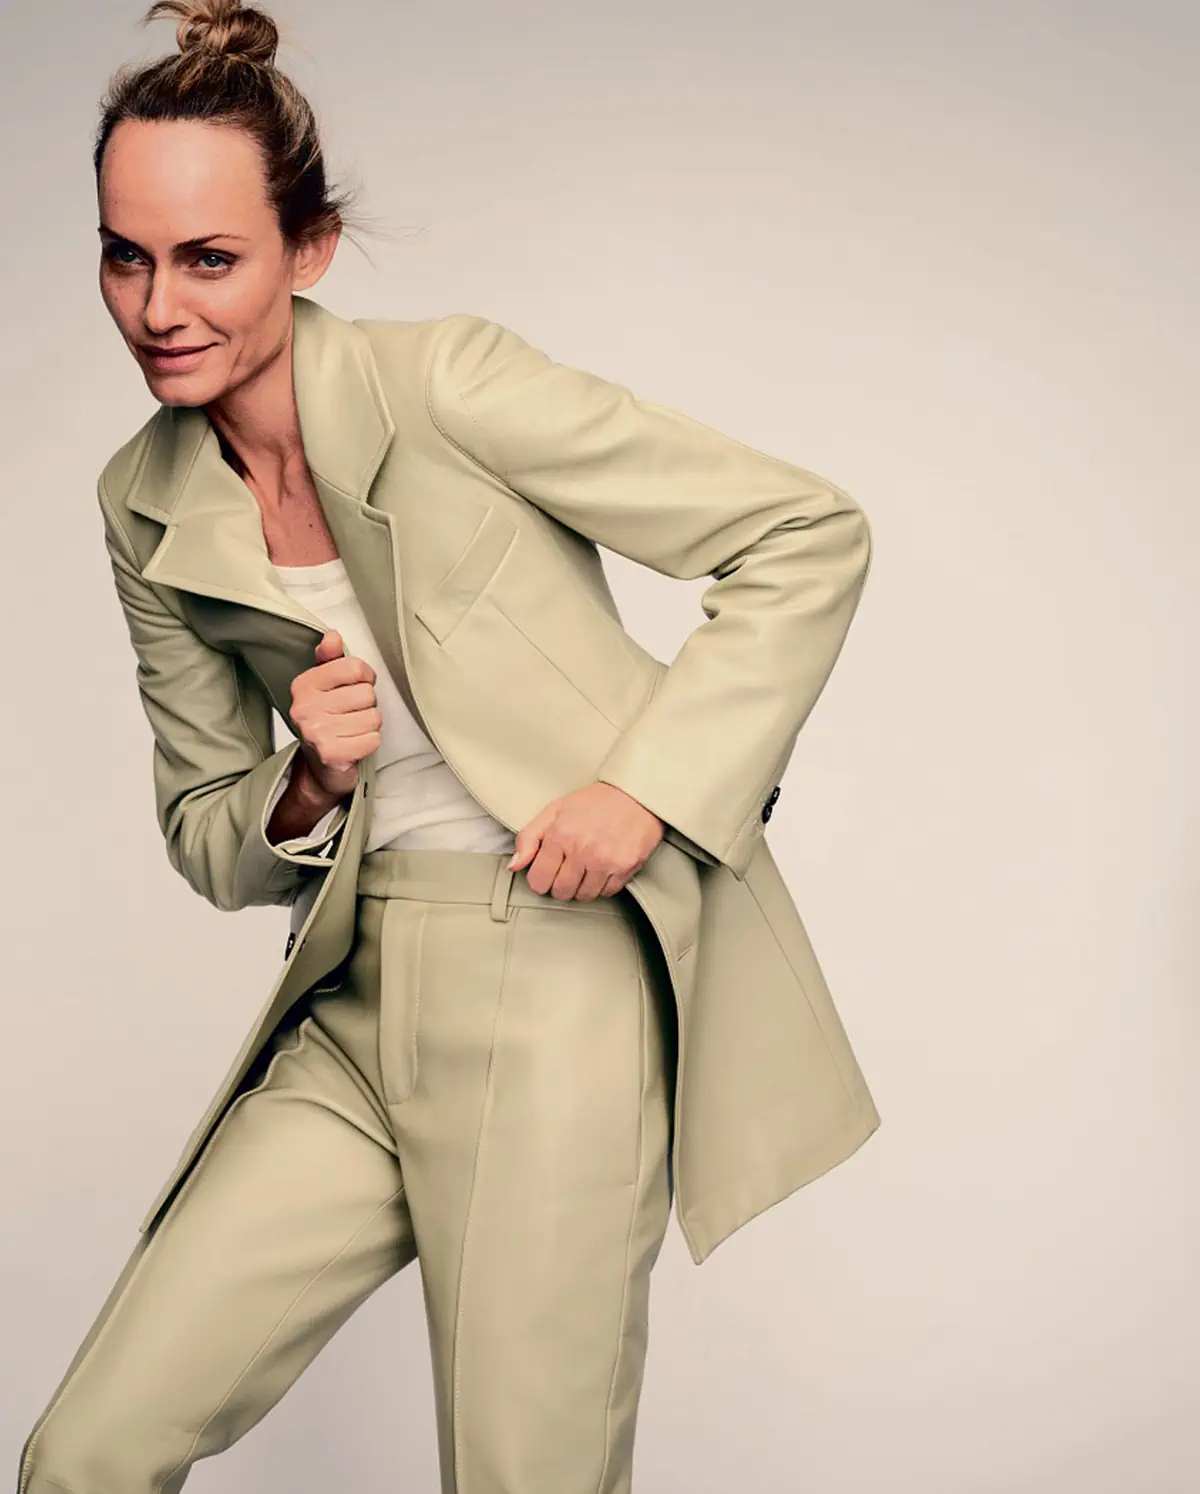 Amber Valletta covers How To Spend It February 11th, 2023 by Nathaniel Goldberg